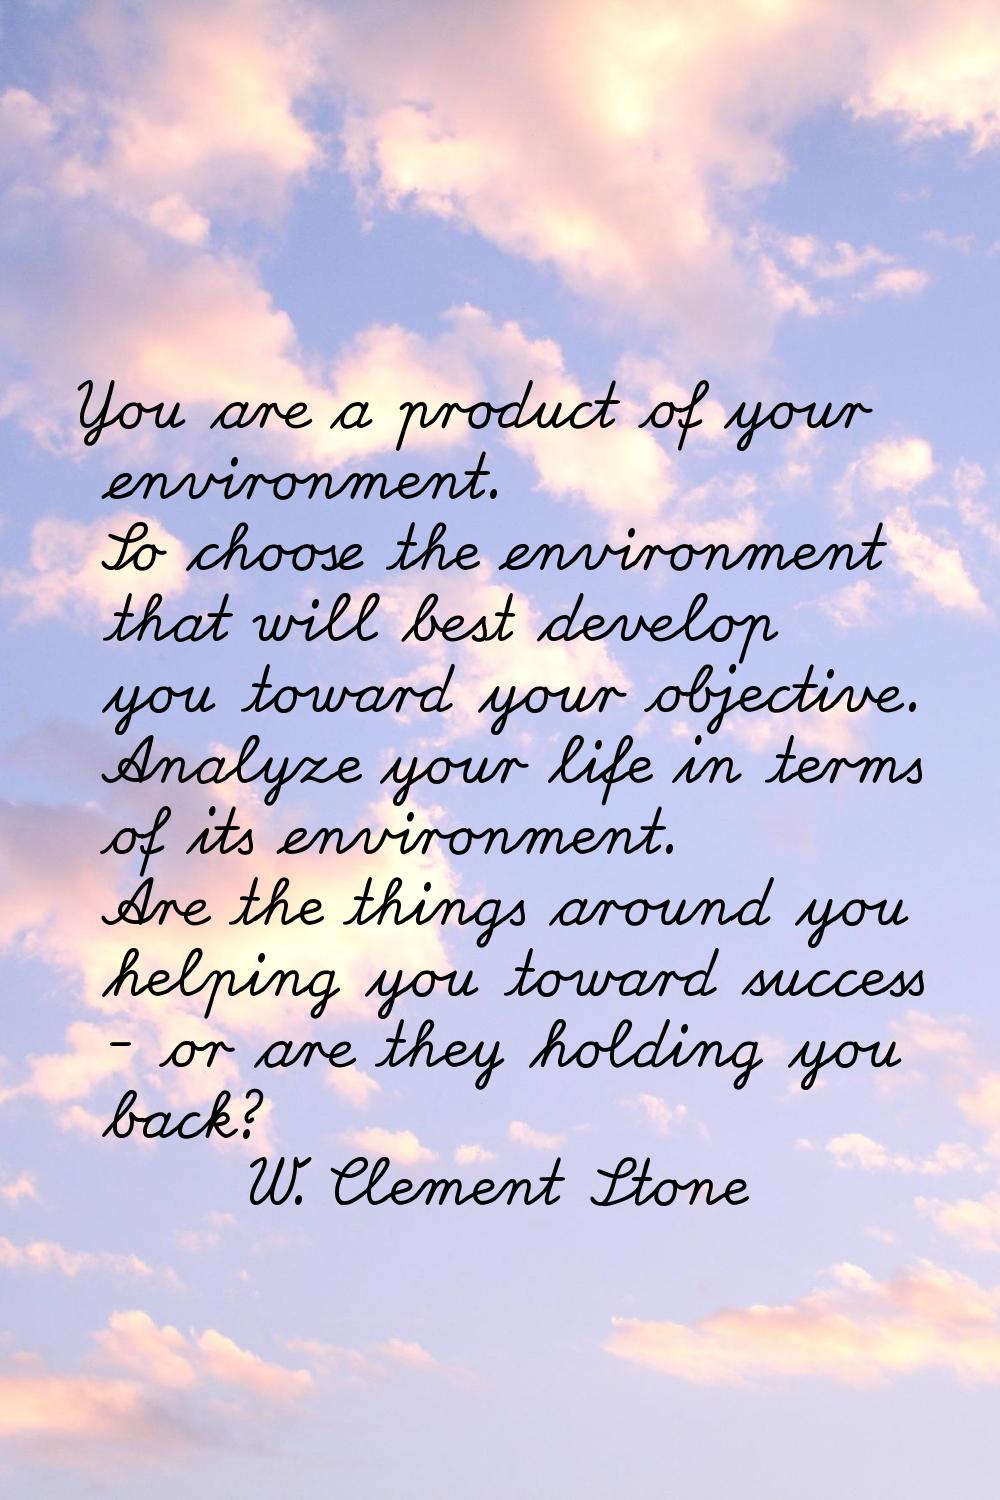 You are a product of your environment. So choose the environment that will best develop you toward 